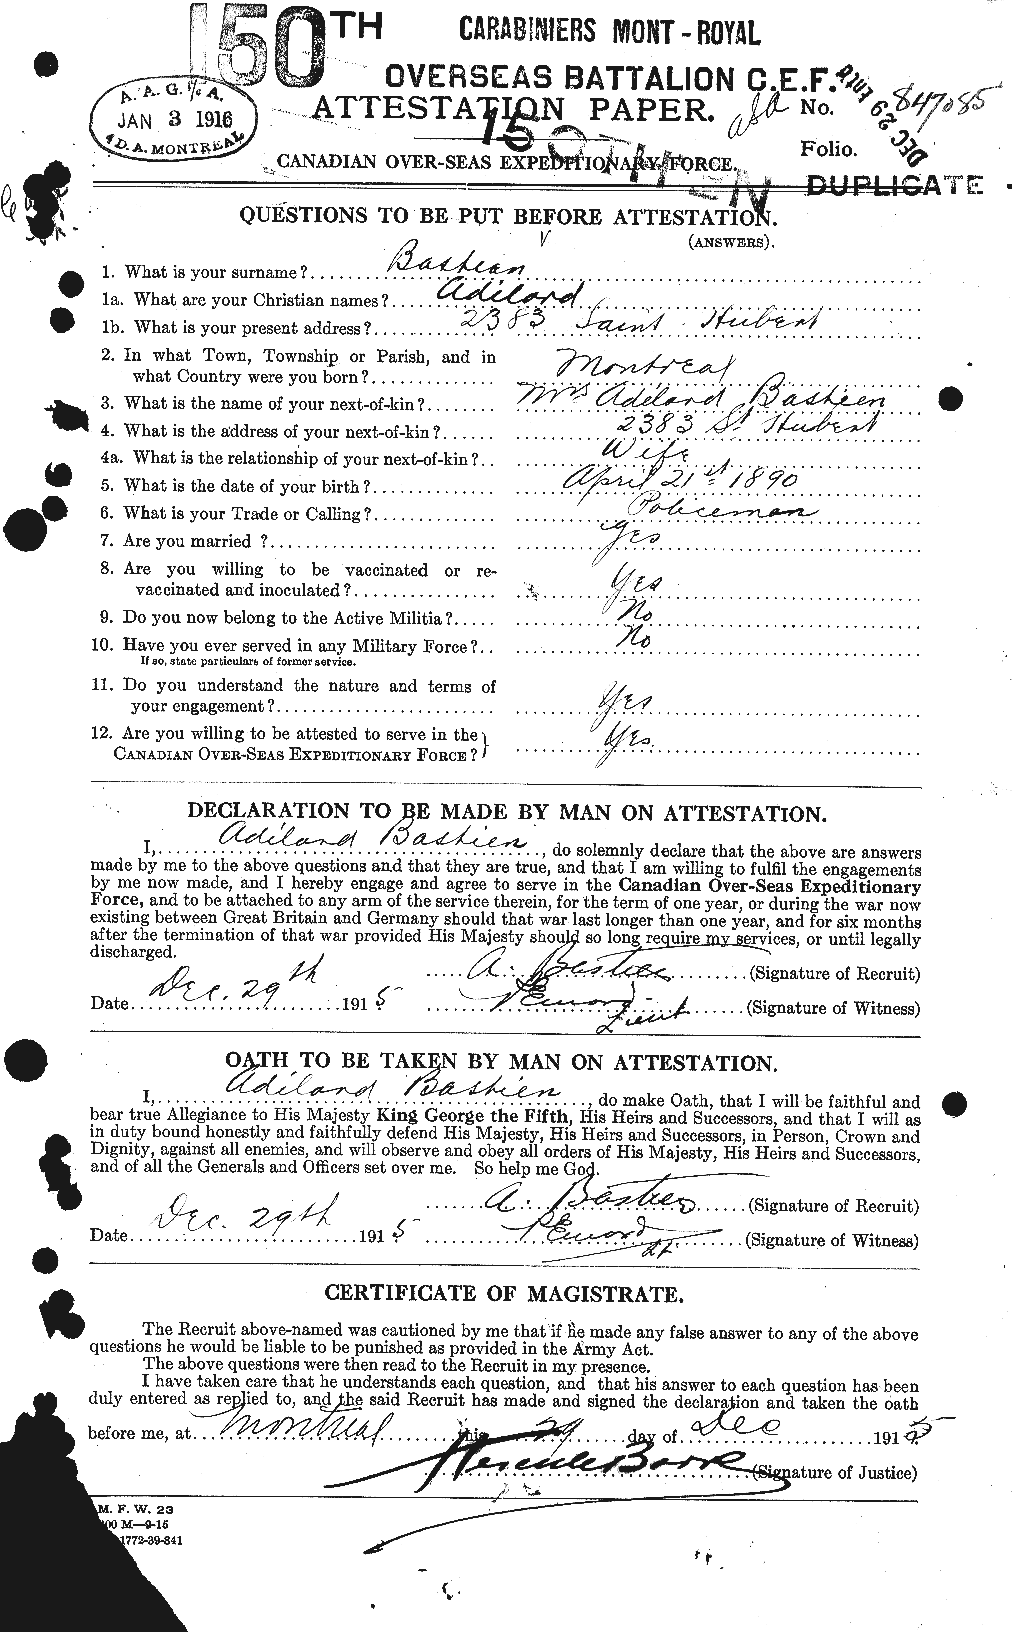 Personnel Records of the First World War - CEF 228250a